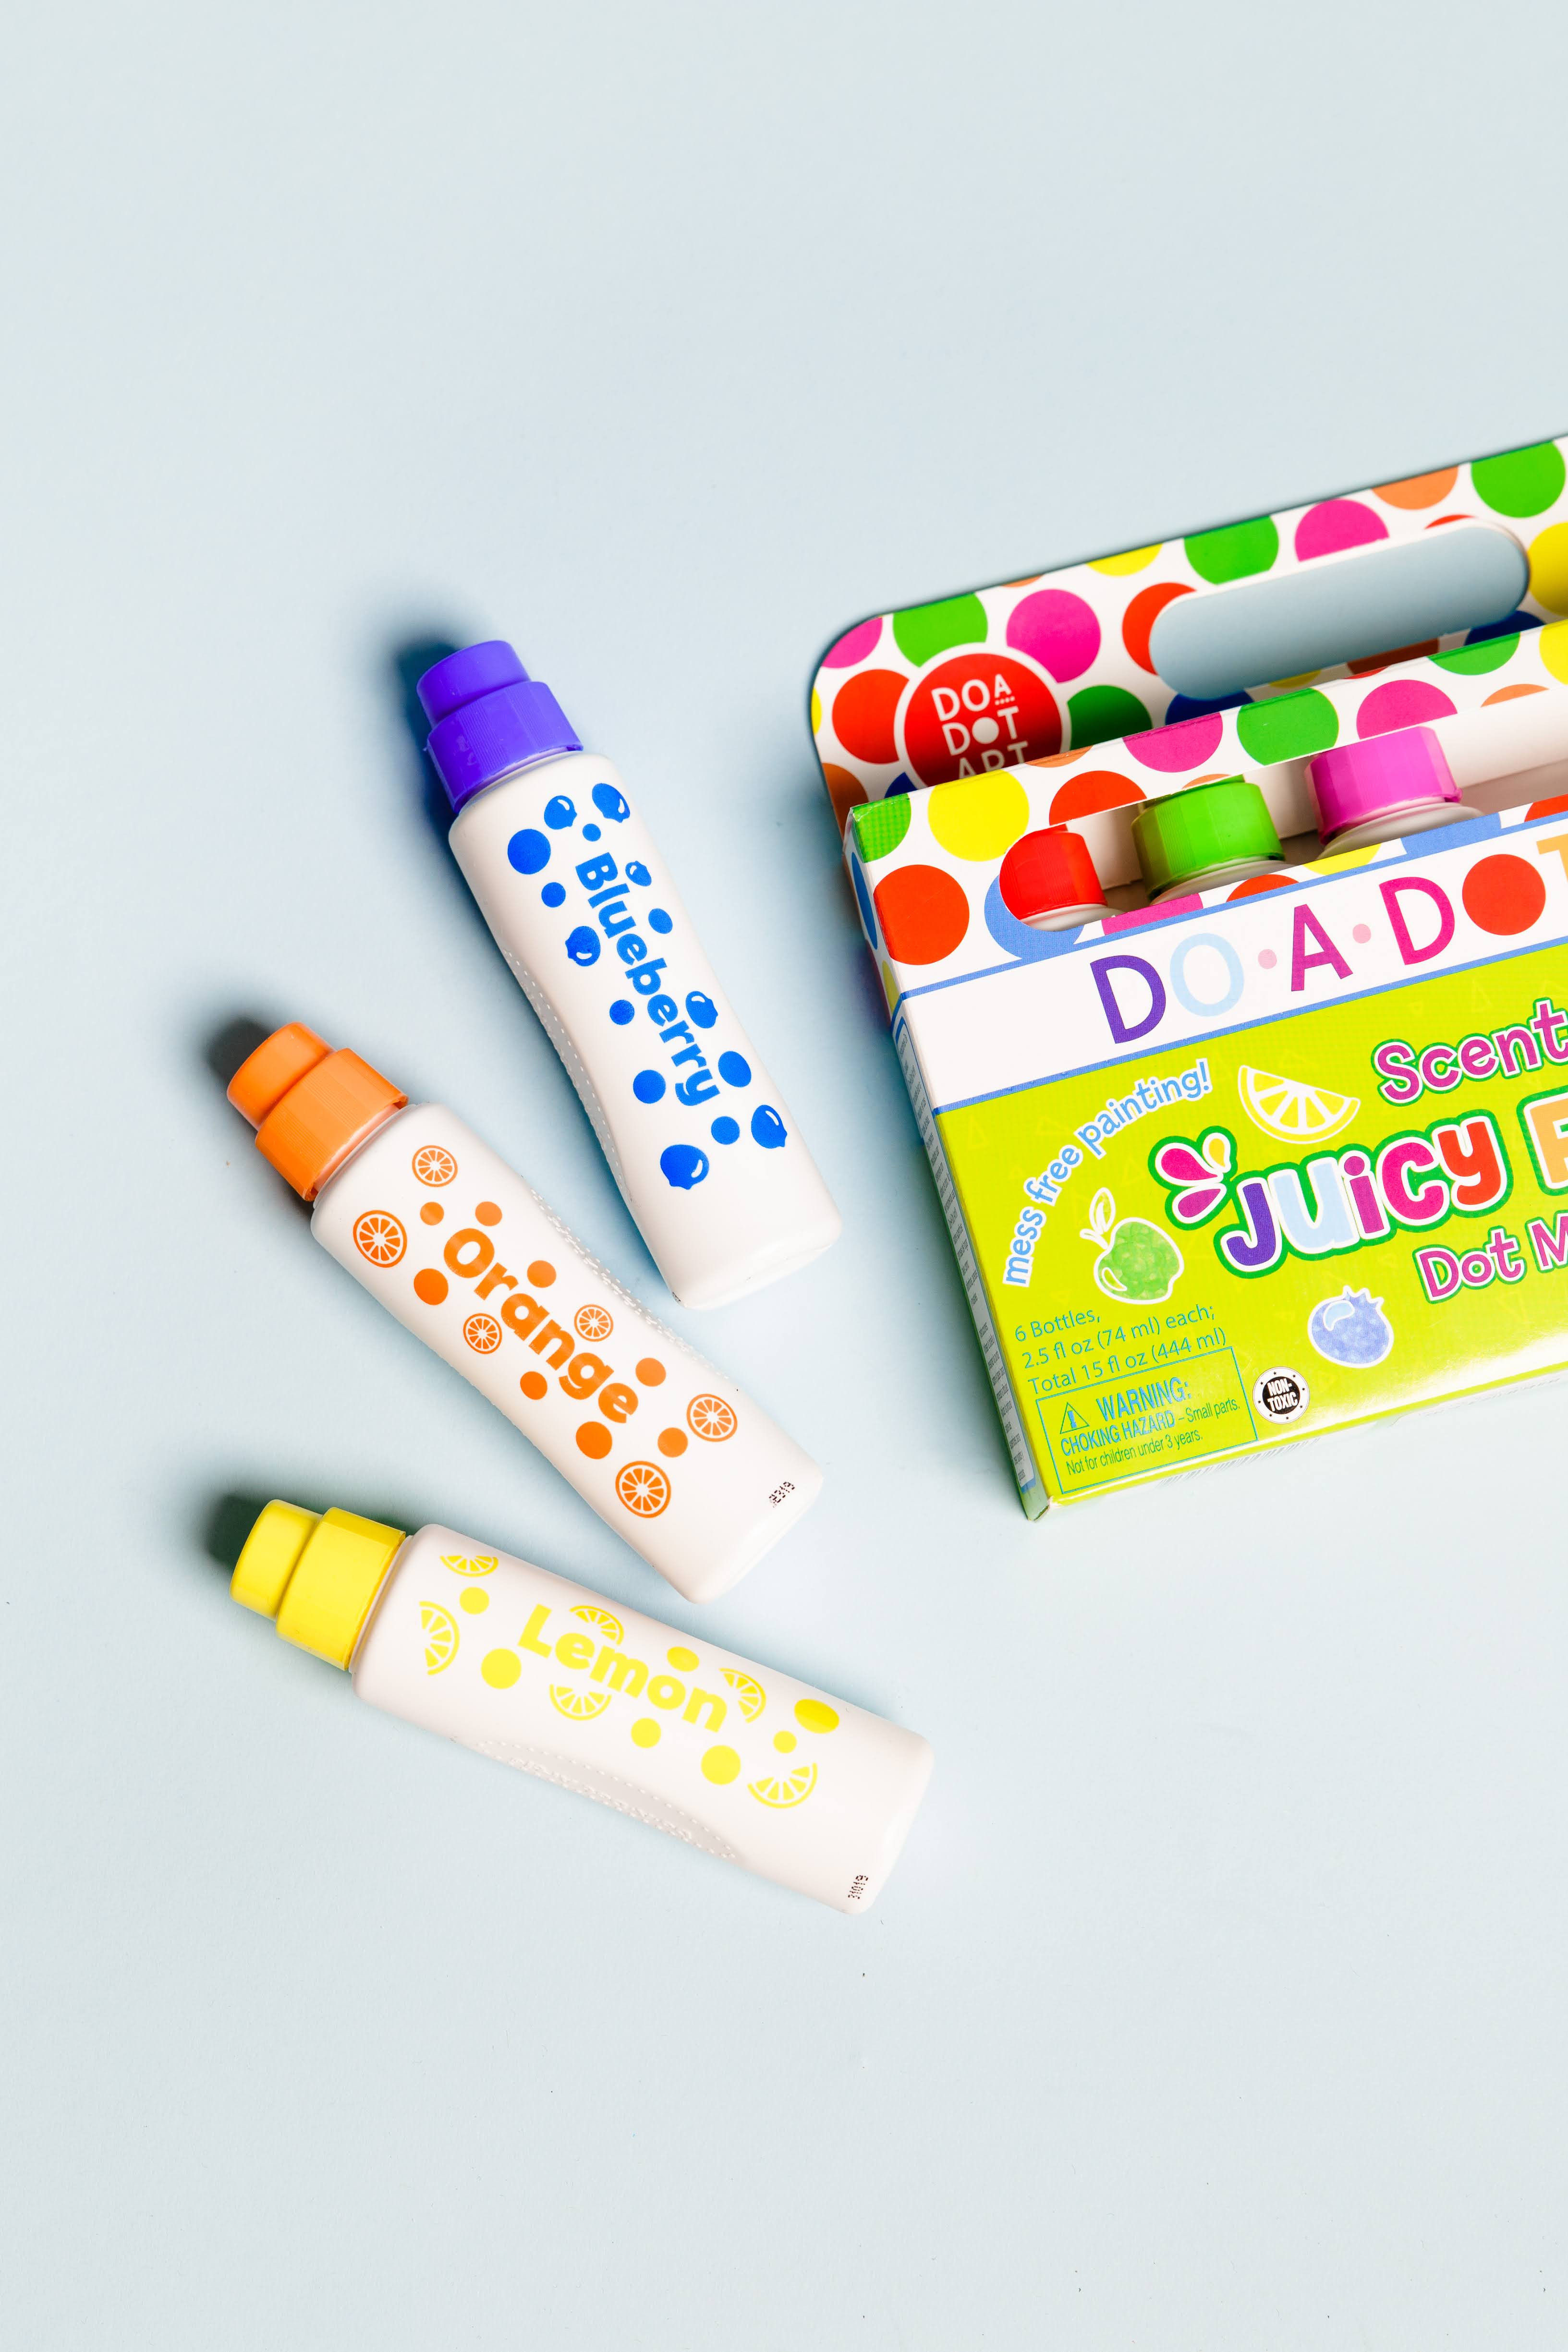 These fruit-scented markers : r/nostalgia